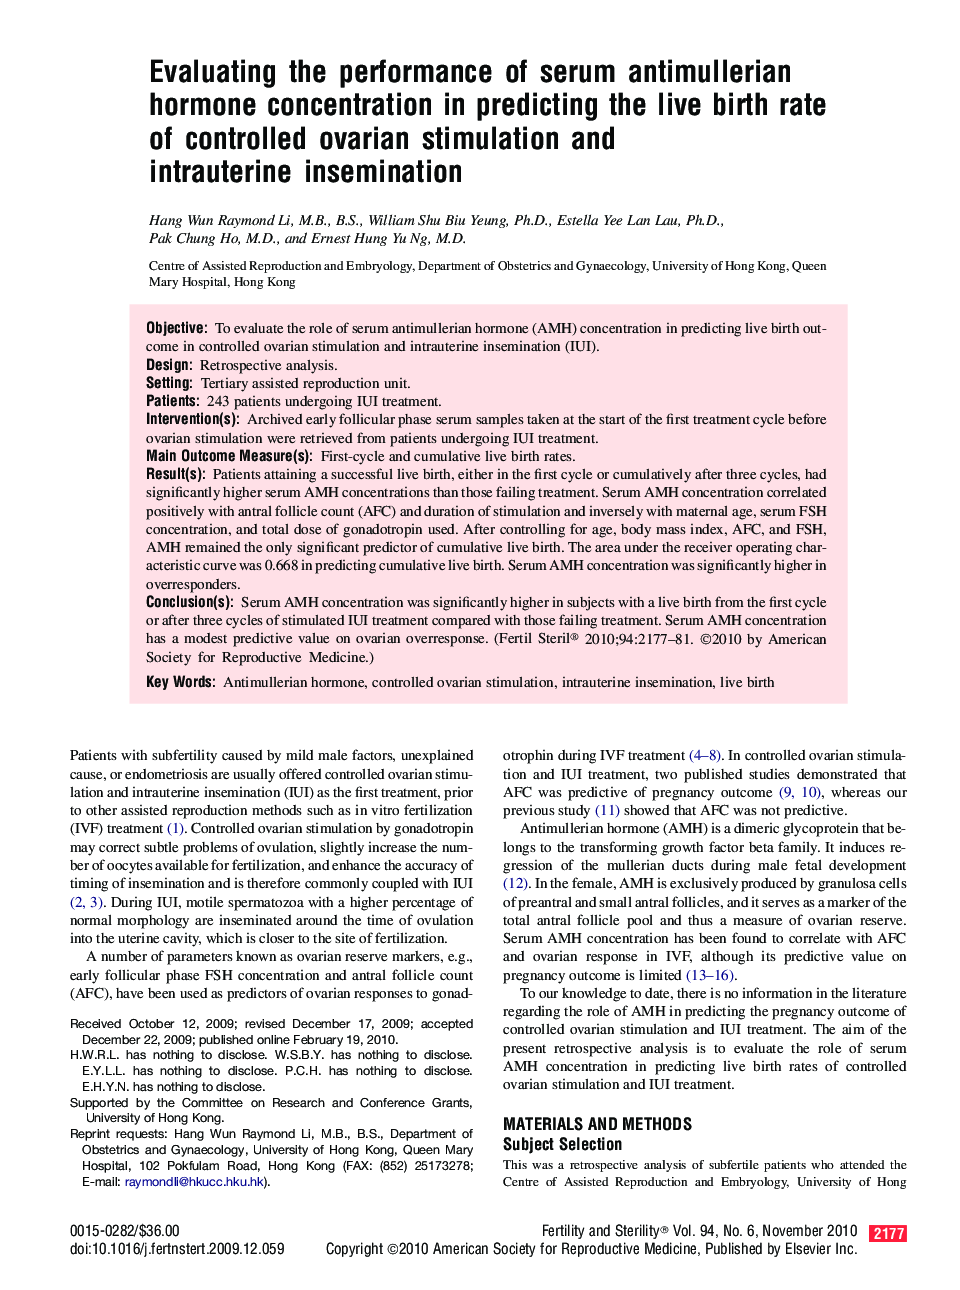 Evaluating the performance of serum antimullerian hormone concentration in predicting the live birth rate of controlled ovarian stimulation and intrauterine insemination 